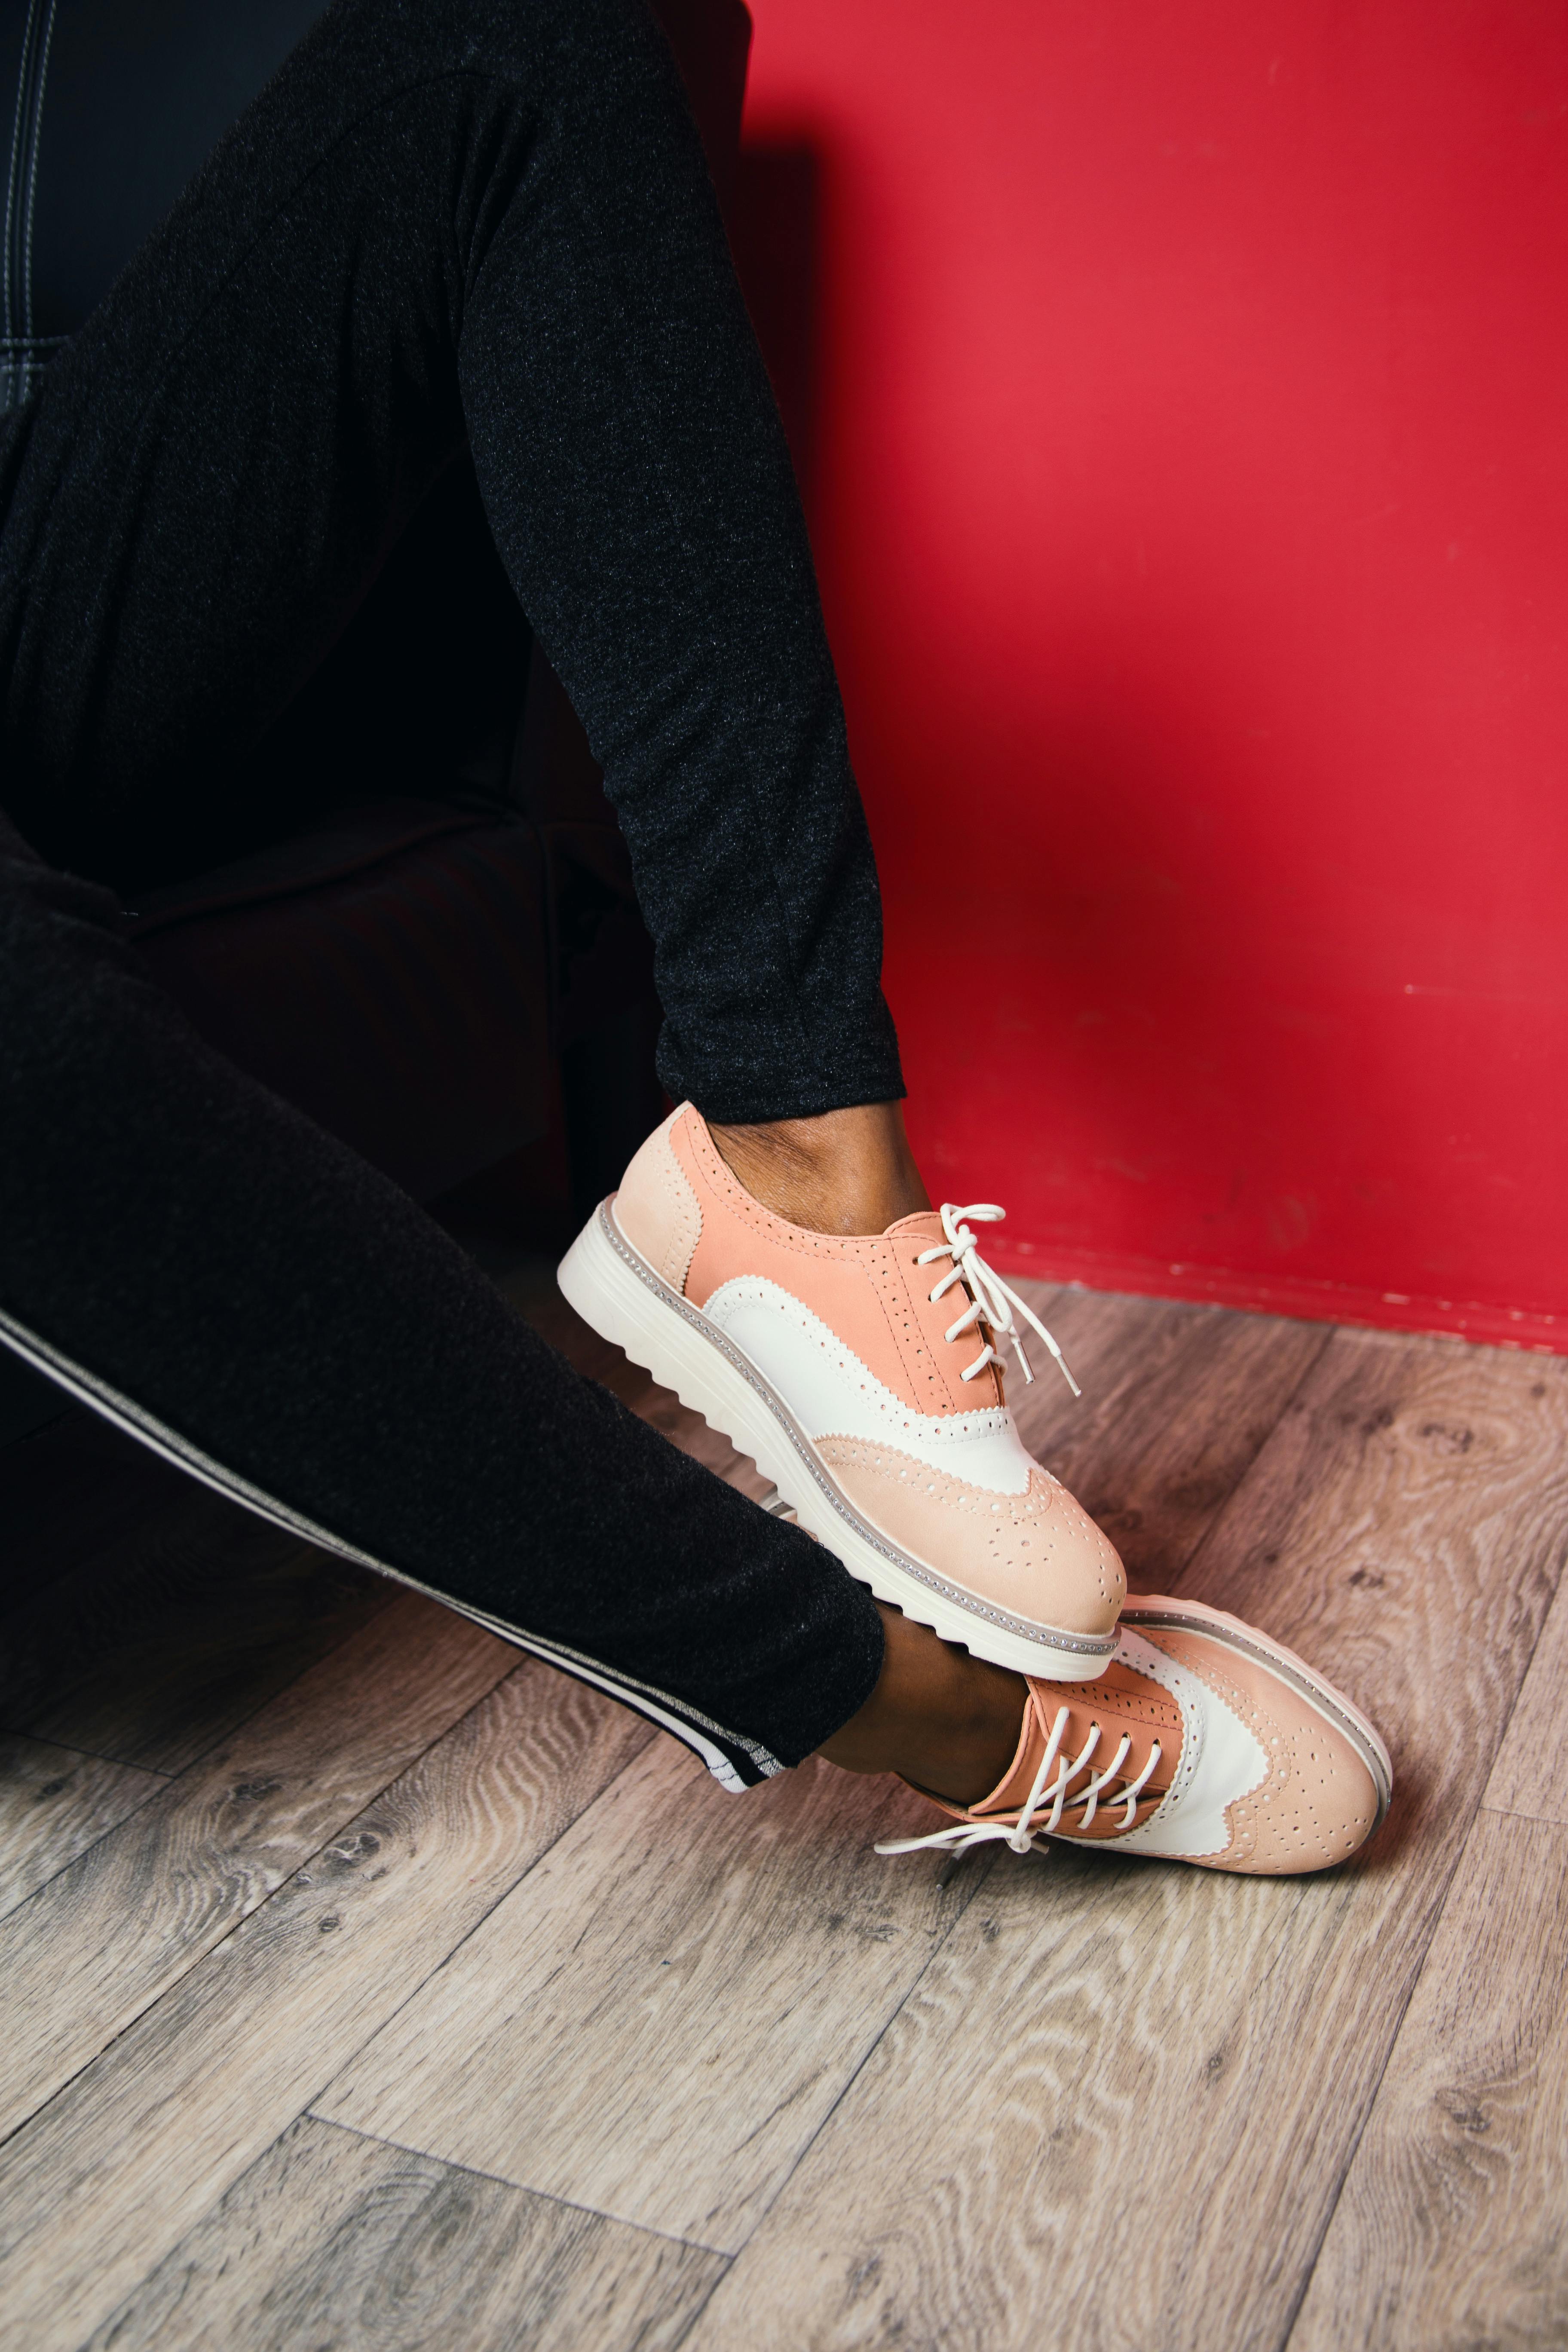 Vans Shoes on Red Background · Free Stock Photo